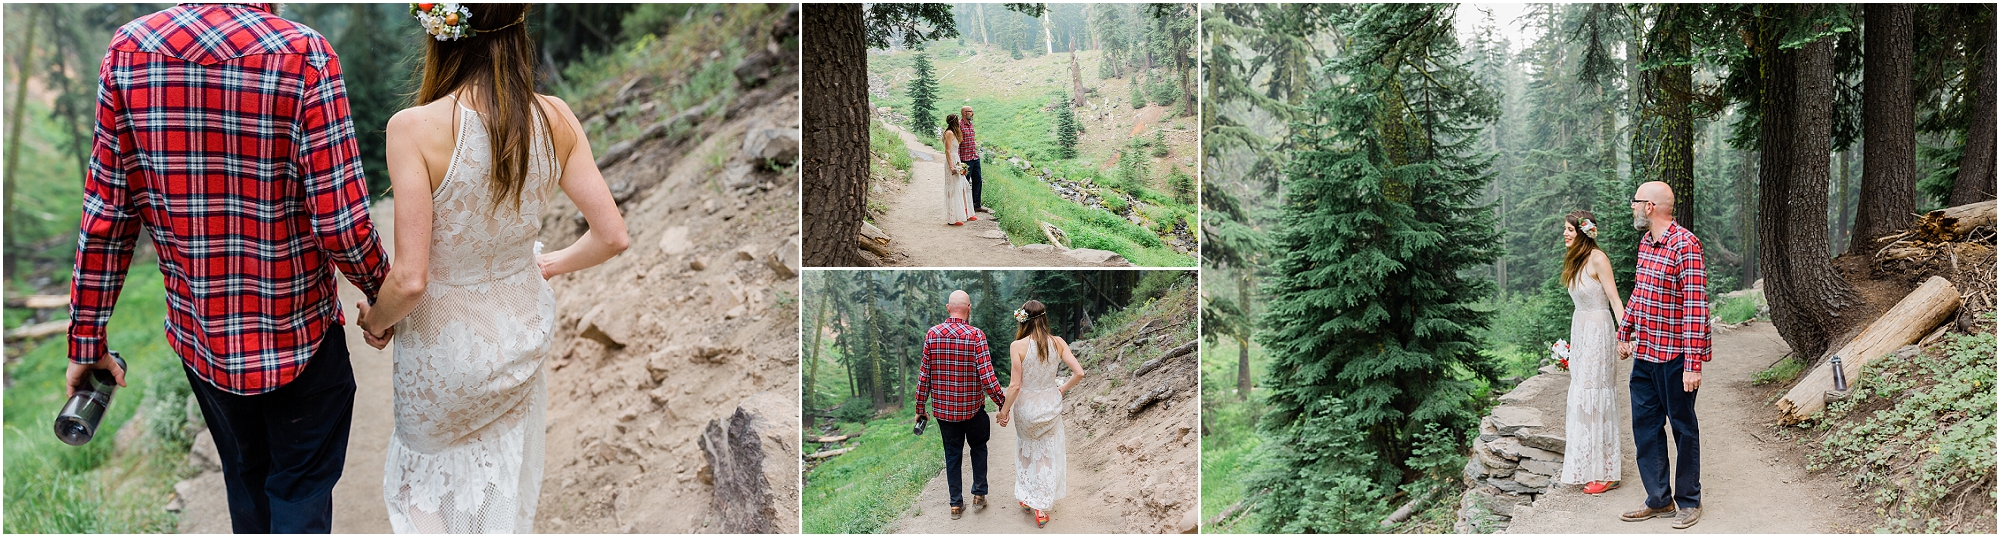 A Crater Lake Elopement in Oregon with hiking to a waterfall for the ceremony. | Erica Swantek Photography